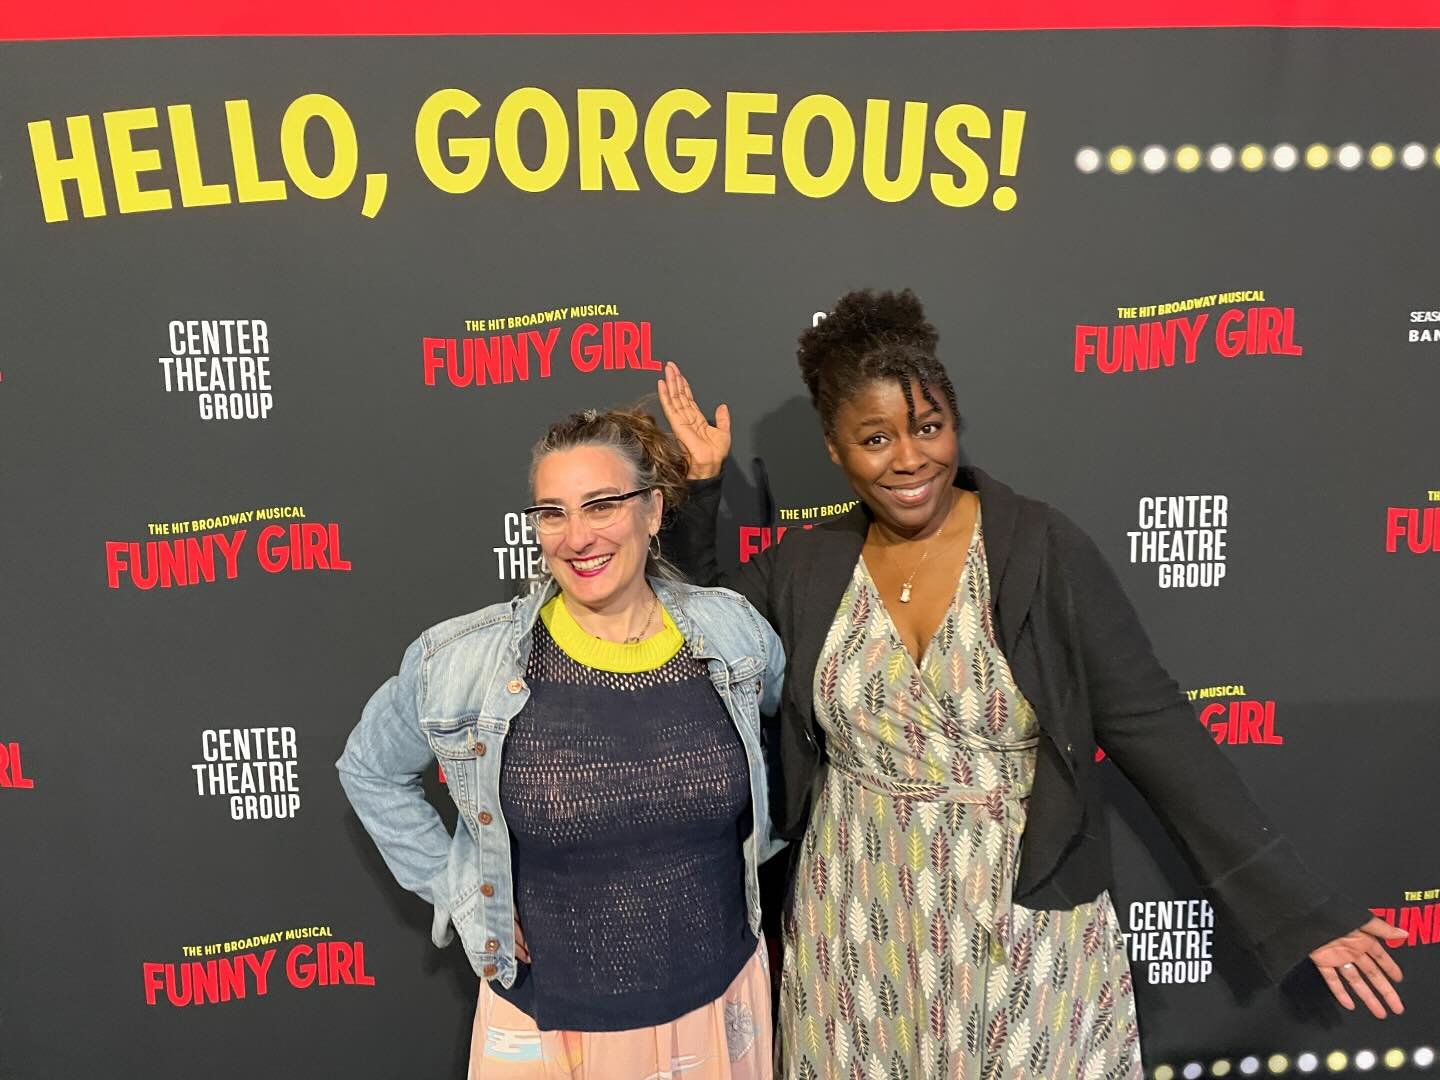 Last night was a true treat, courtesy of @cecilseaskull and the cast of #FunnyGirl!  I learned the songs from my mom as a kid, listening to her 45s. But to see the show on stage @theahmansontheatre was a true delight!

@cecilseaskull has long been my